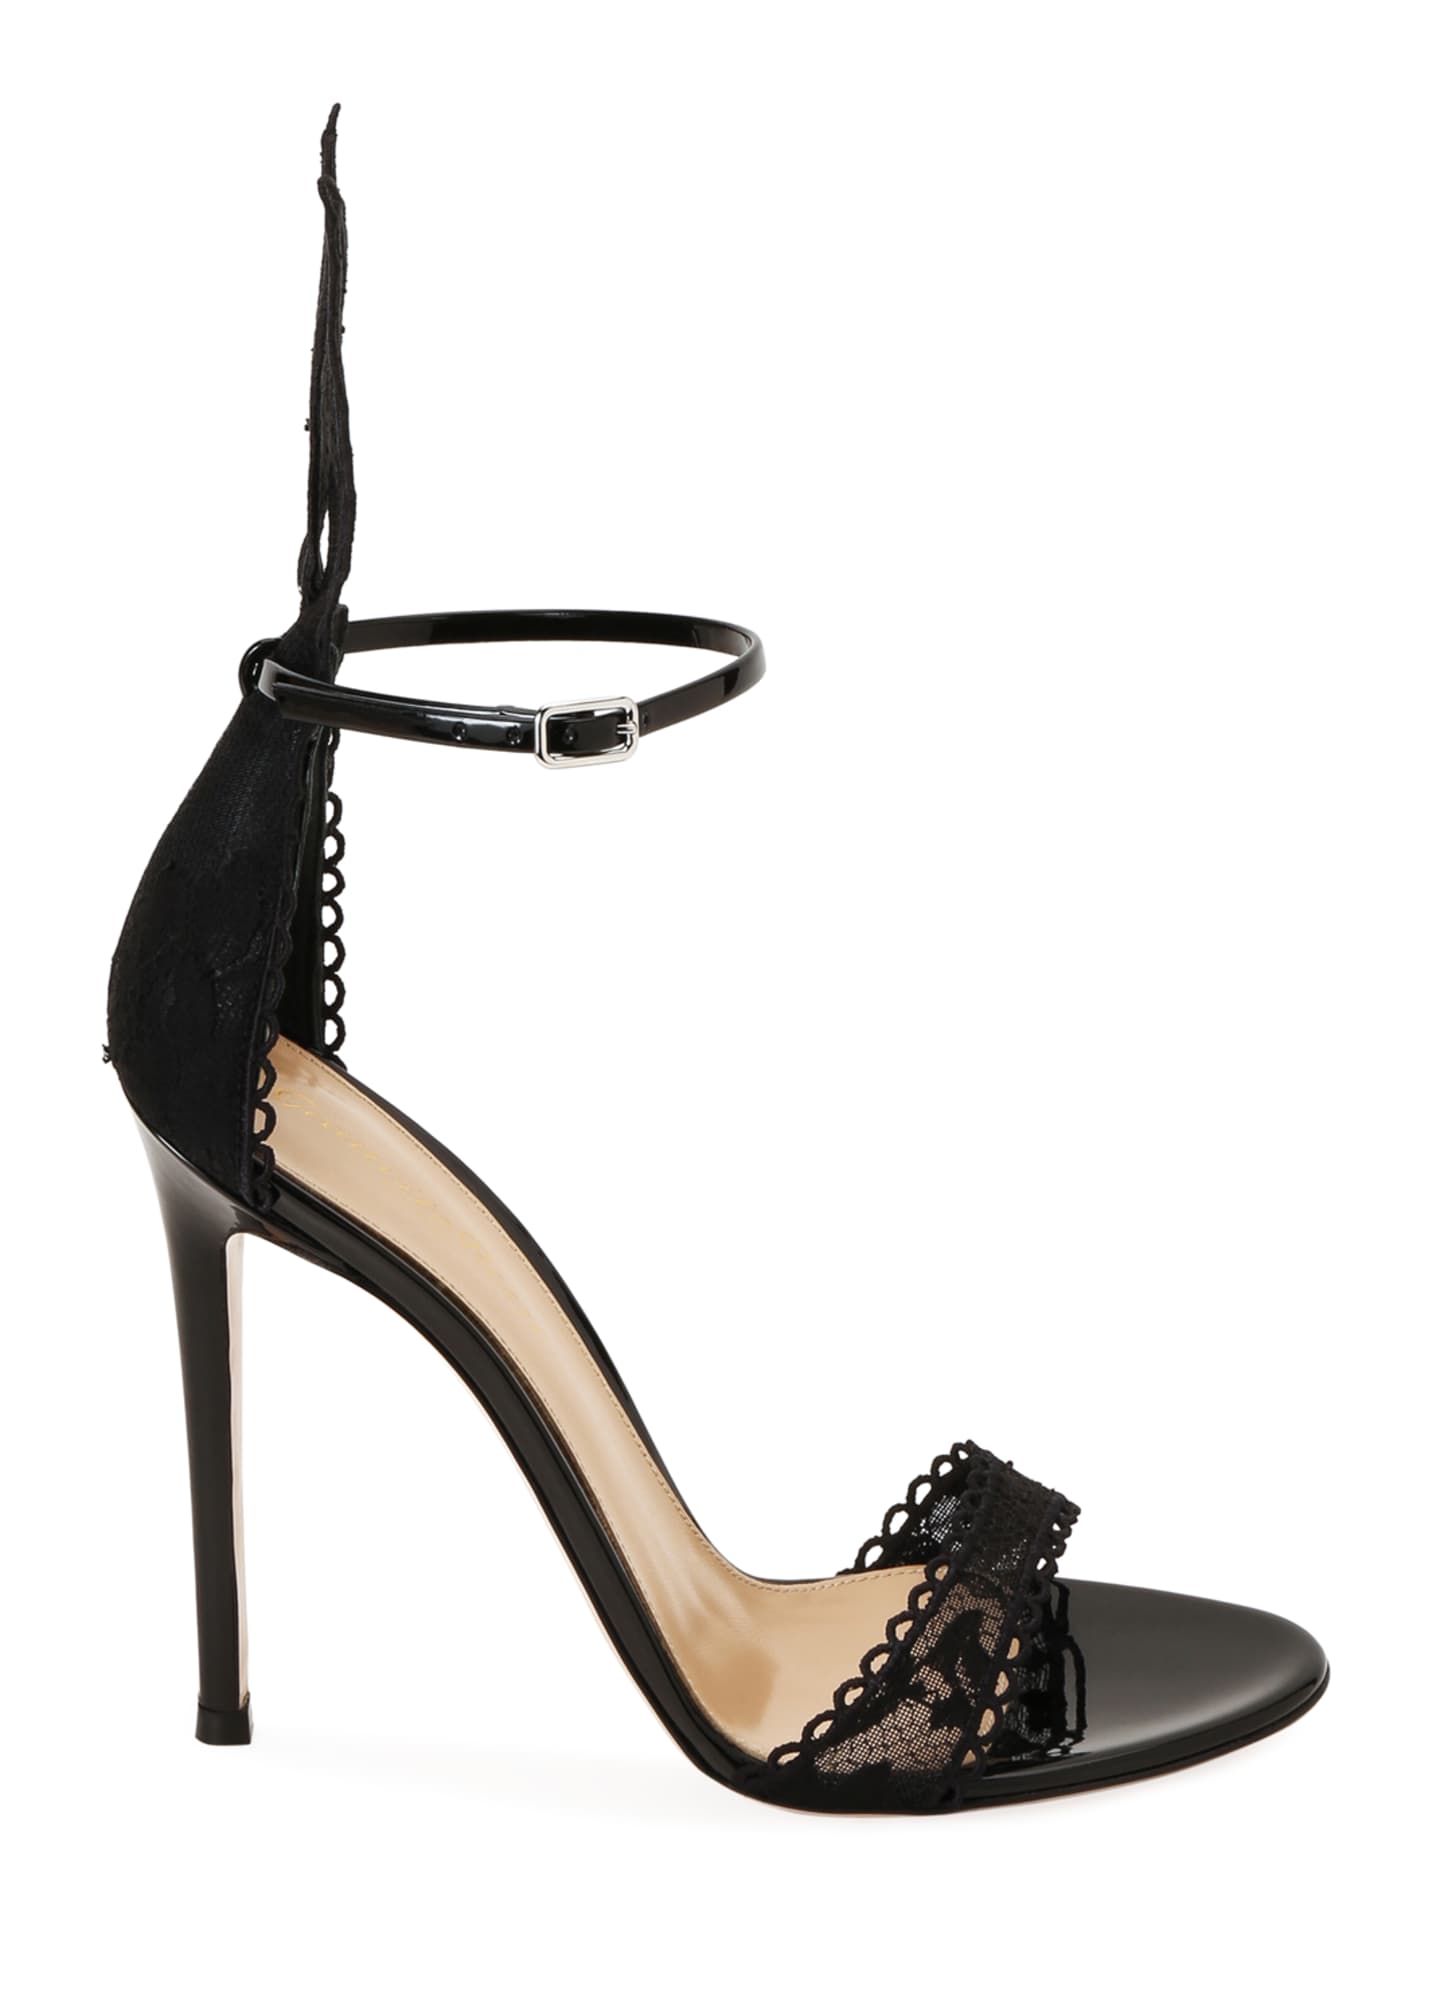 Gianvito Rossi Lace Ankle-Strap Sandals with Bunny Ears - Bergdorf Goodman